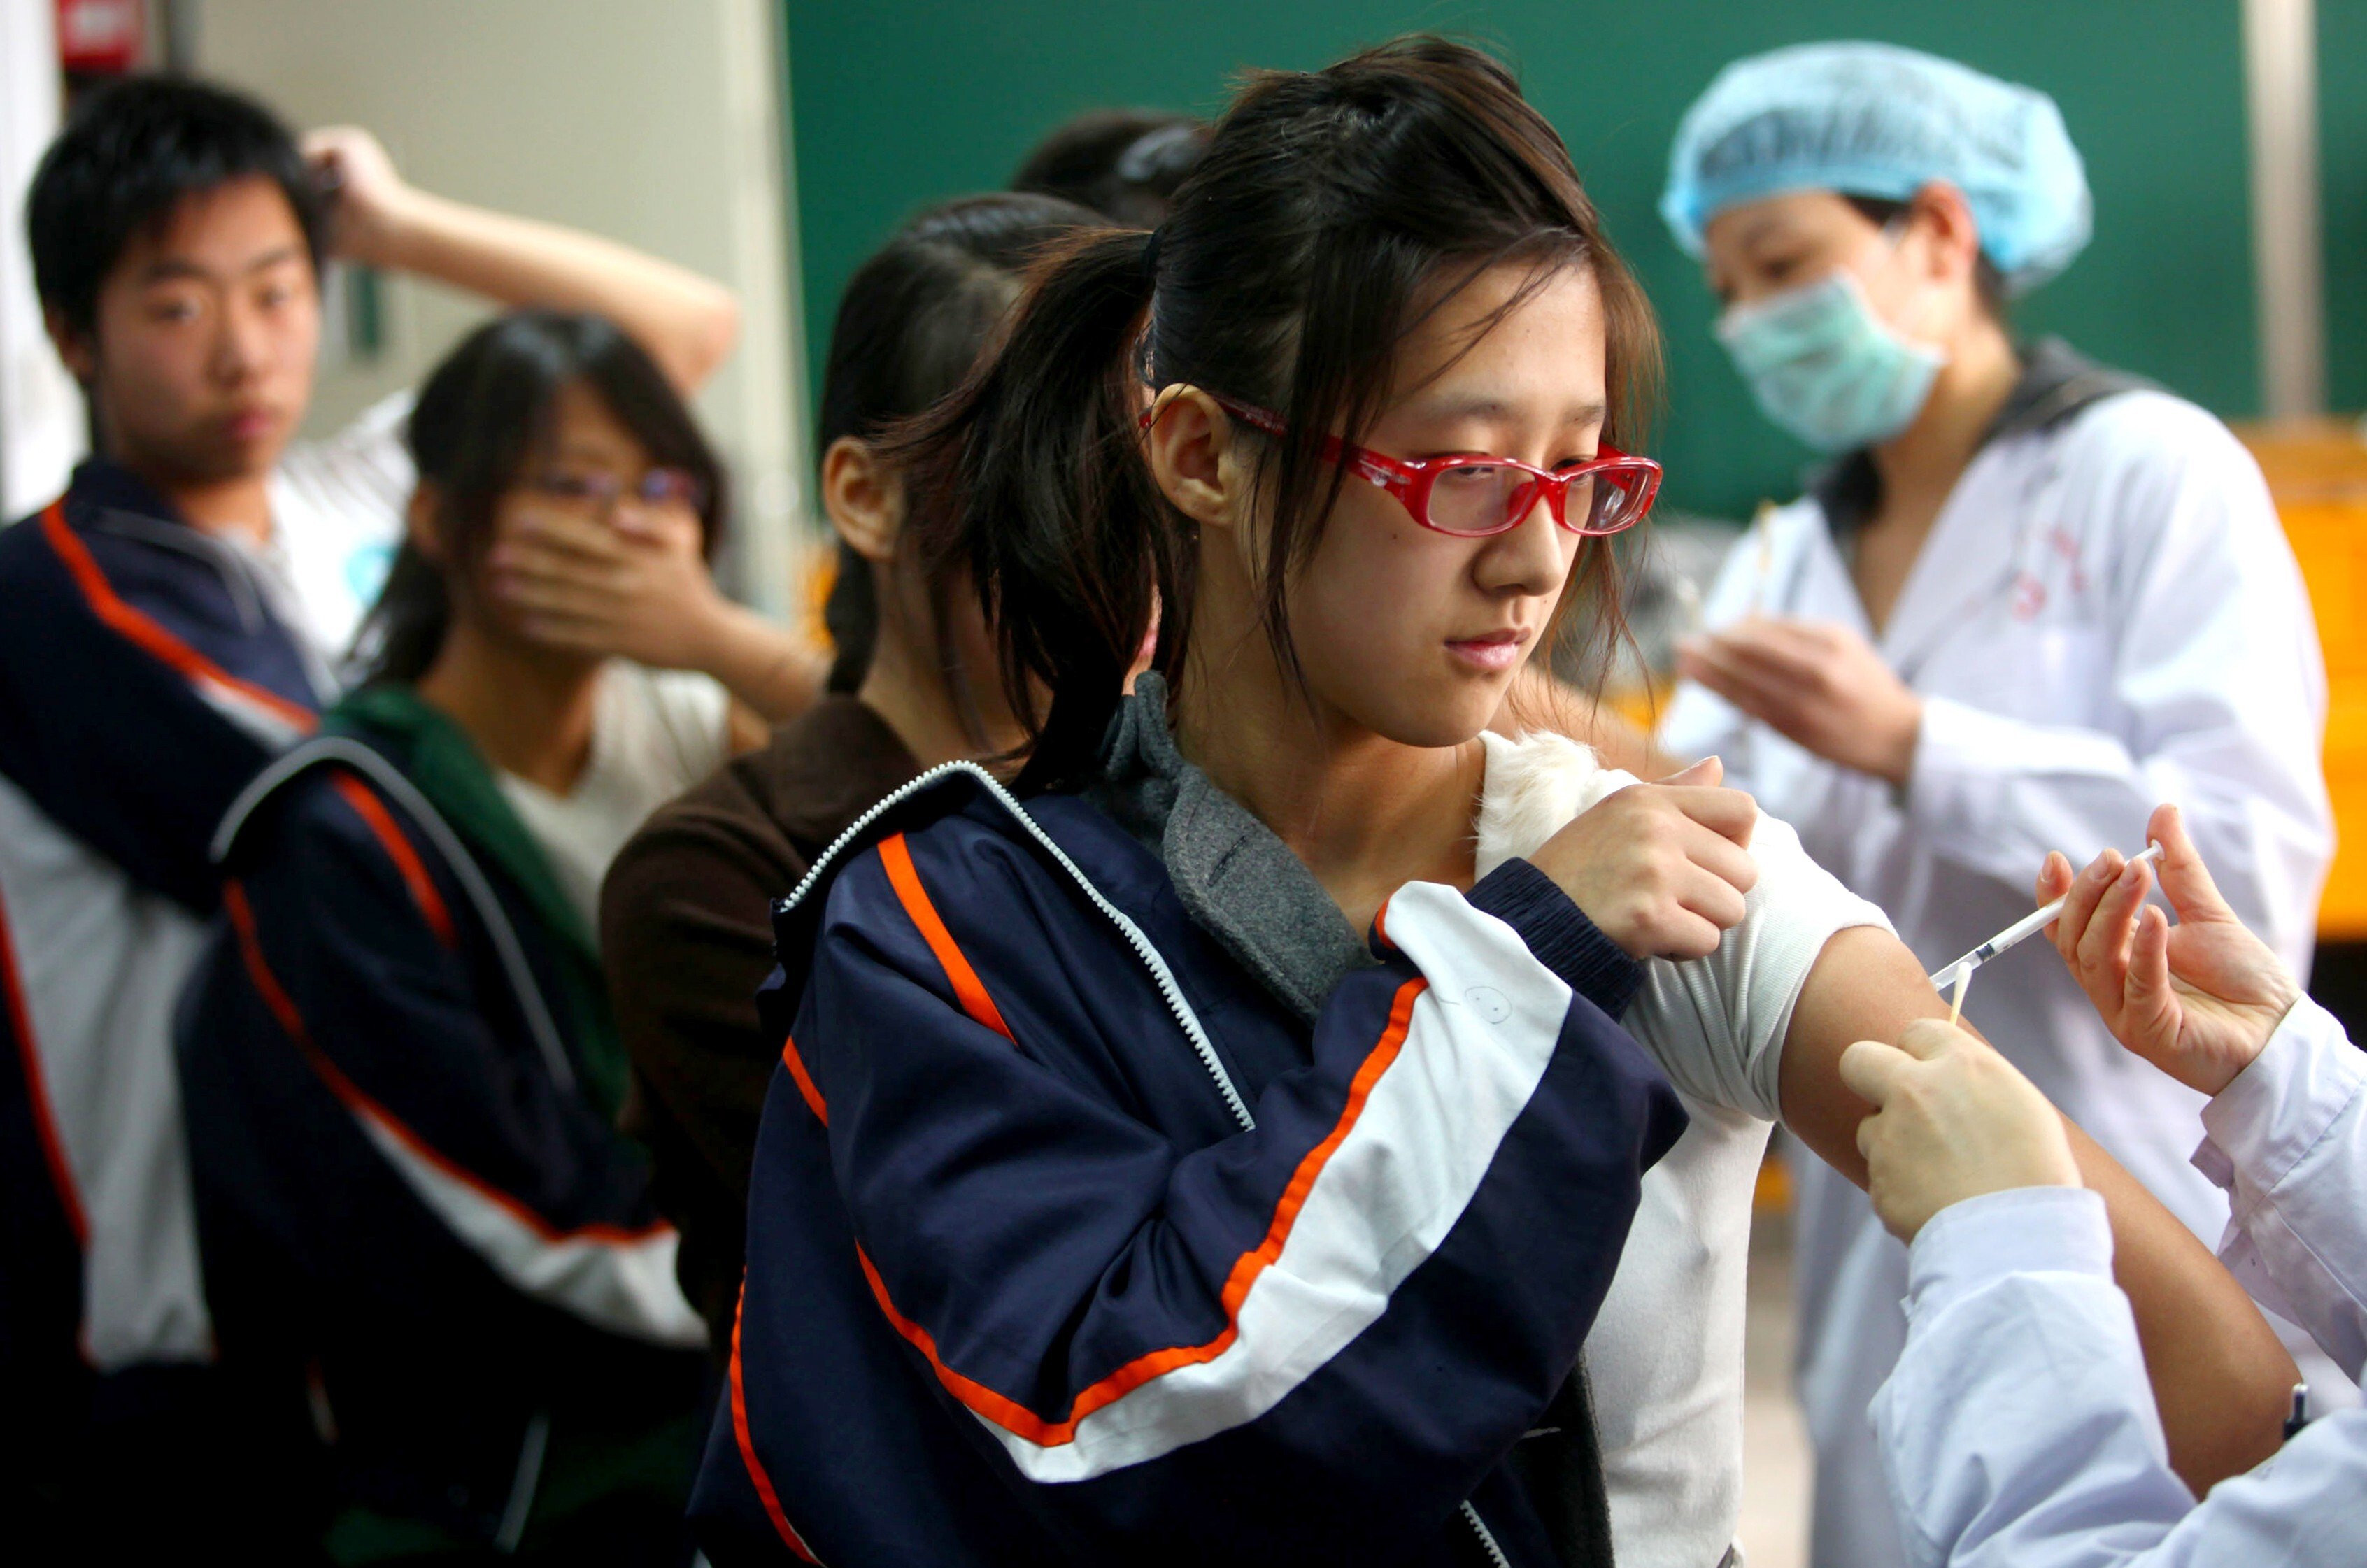 About 30 million flu shots are usually given in China each year, according to official data. Photo: AFP